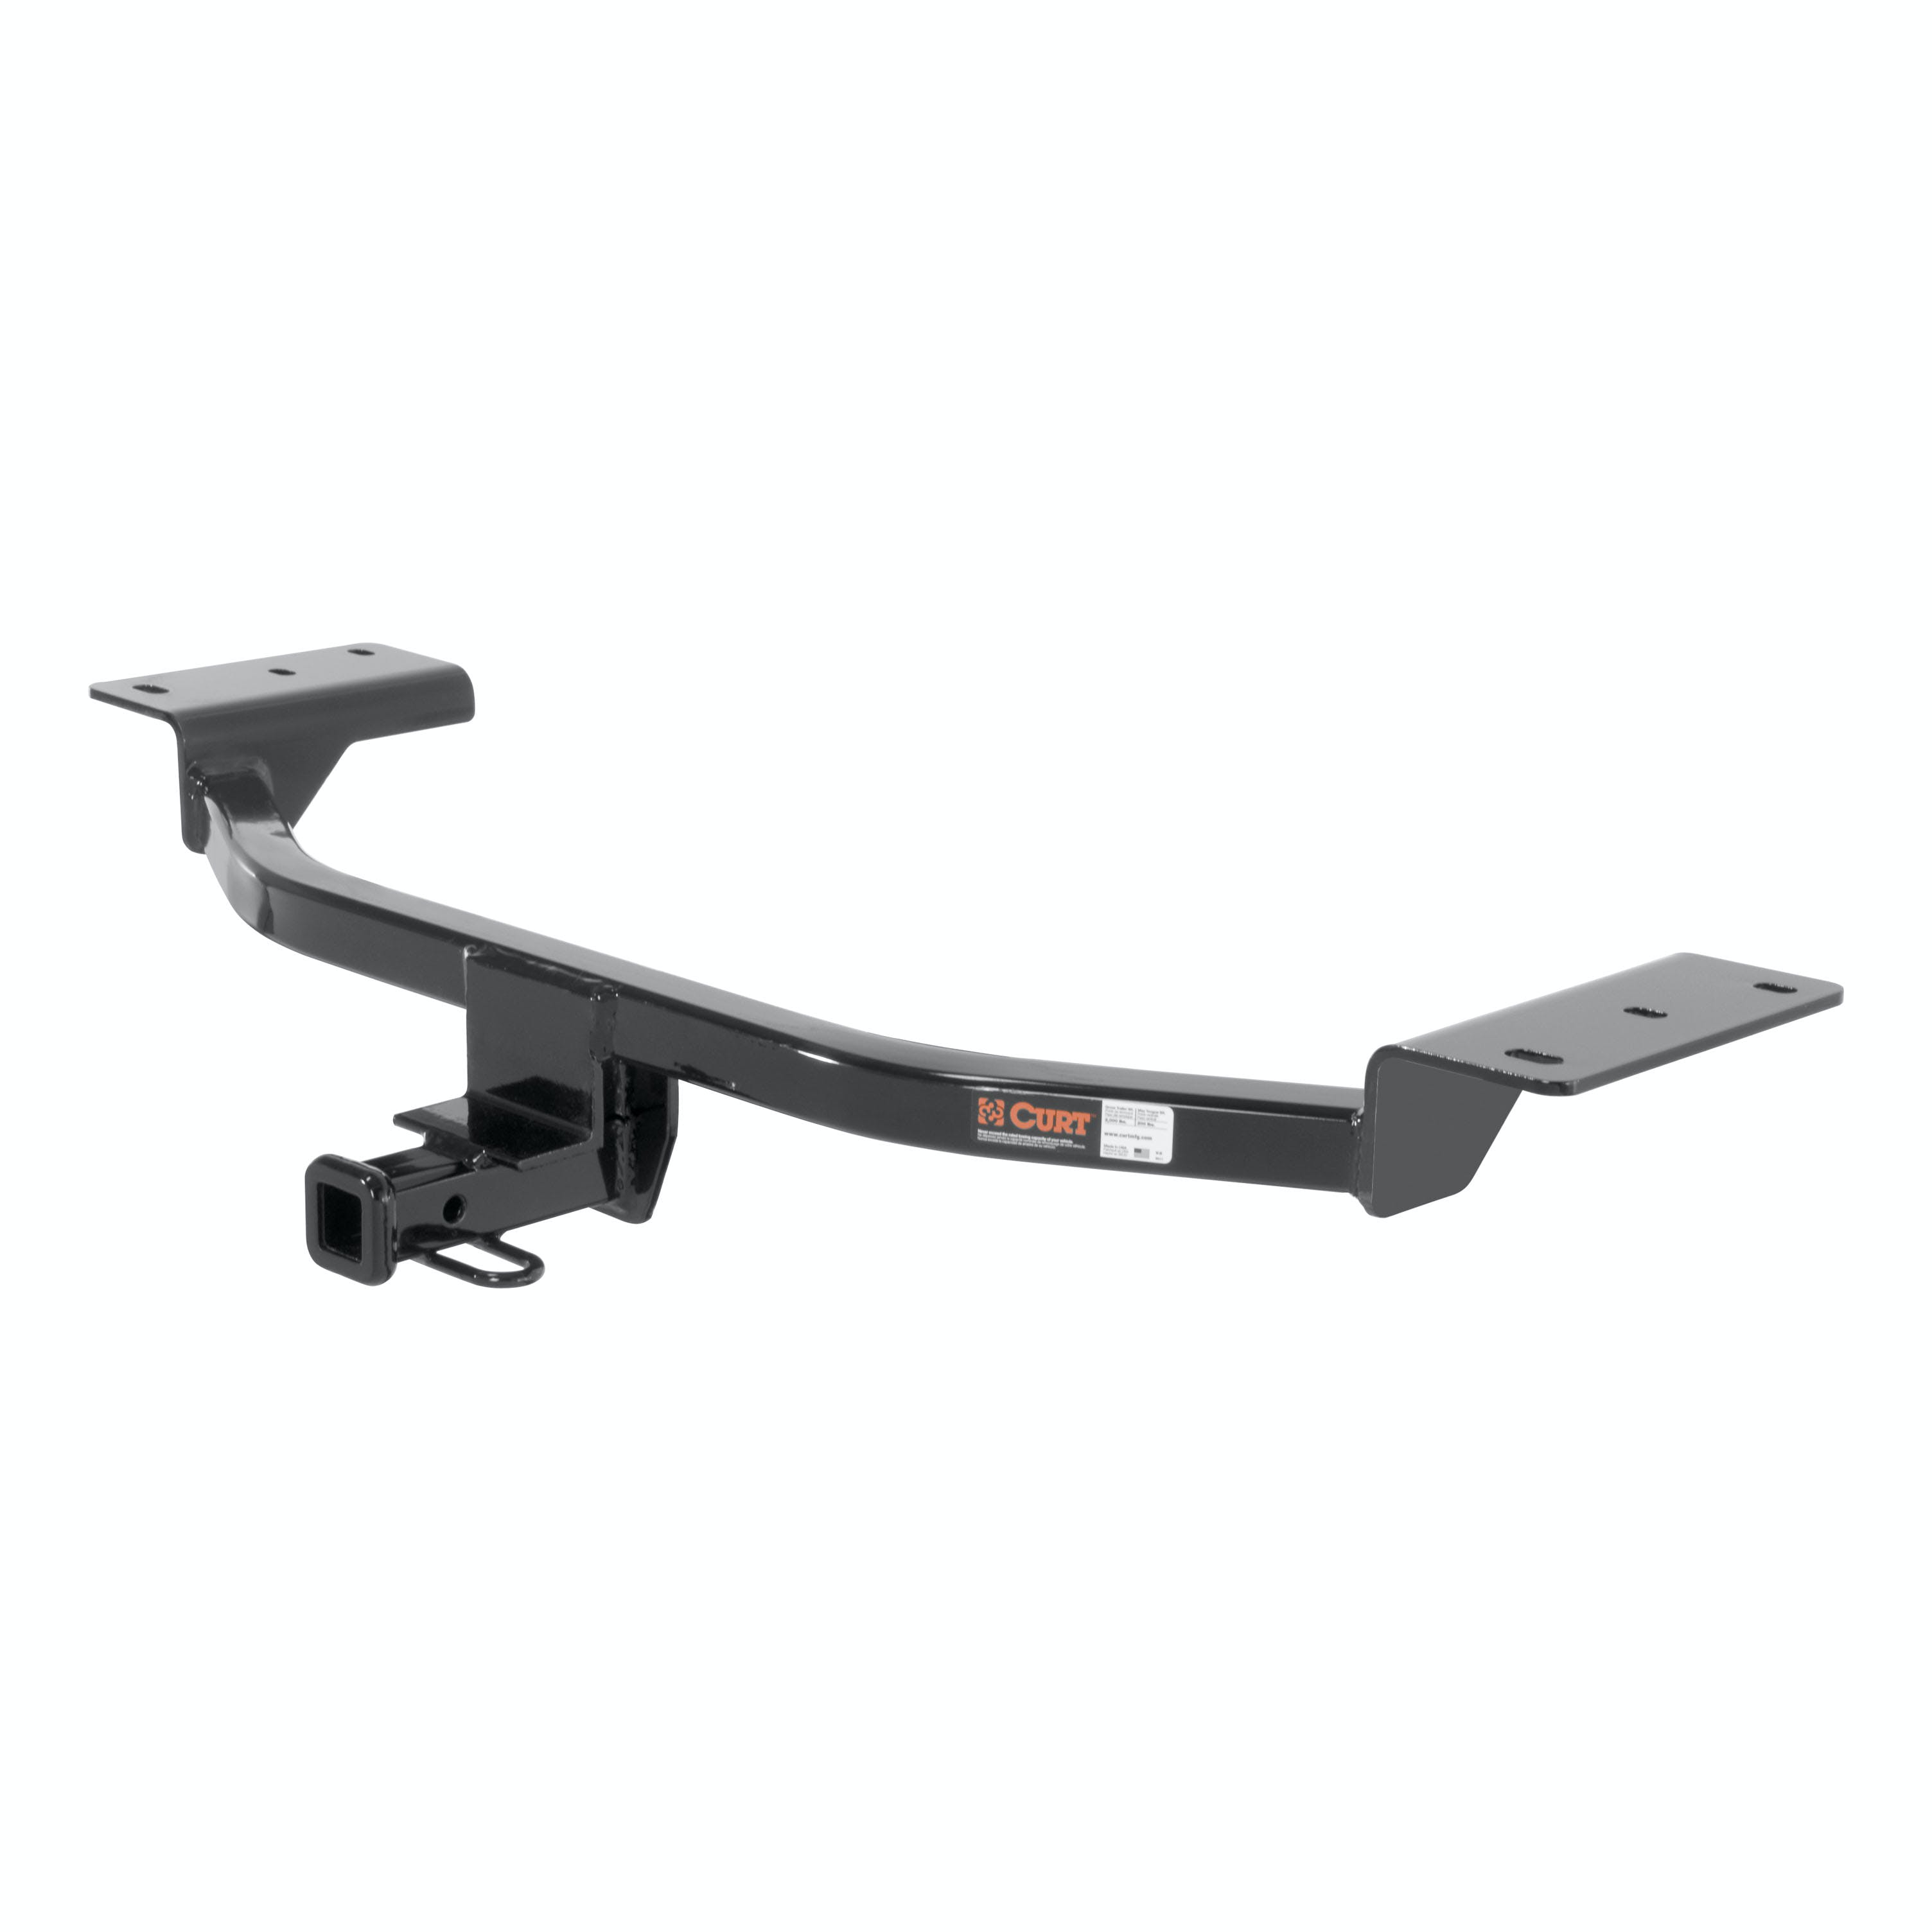 CURT 11158 Class 1 Trailer Hitch, 1-1/4 Receiver, Select Ford Focus